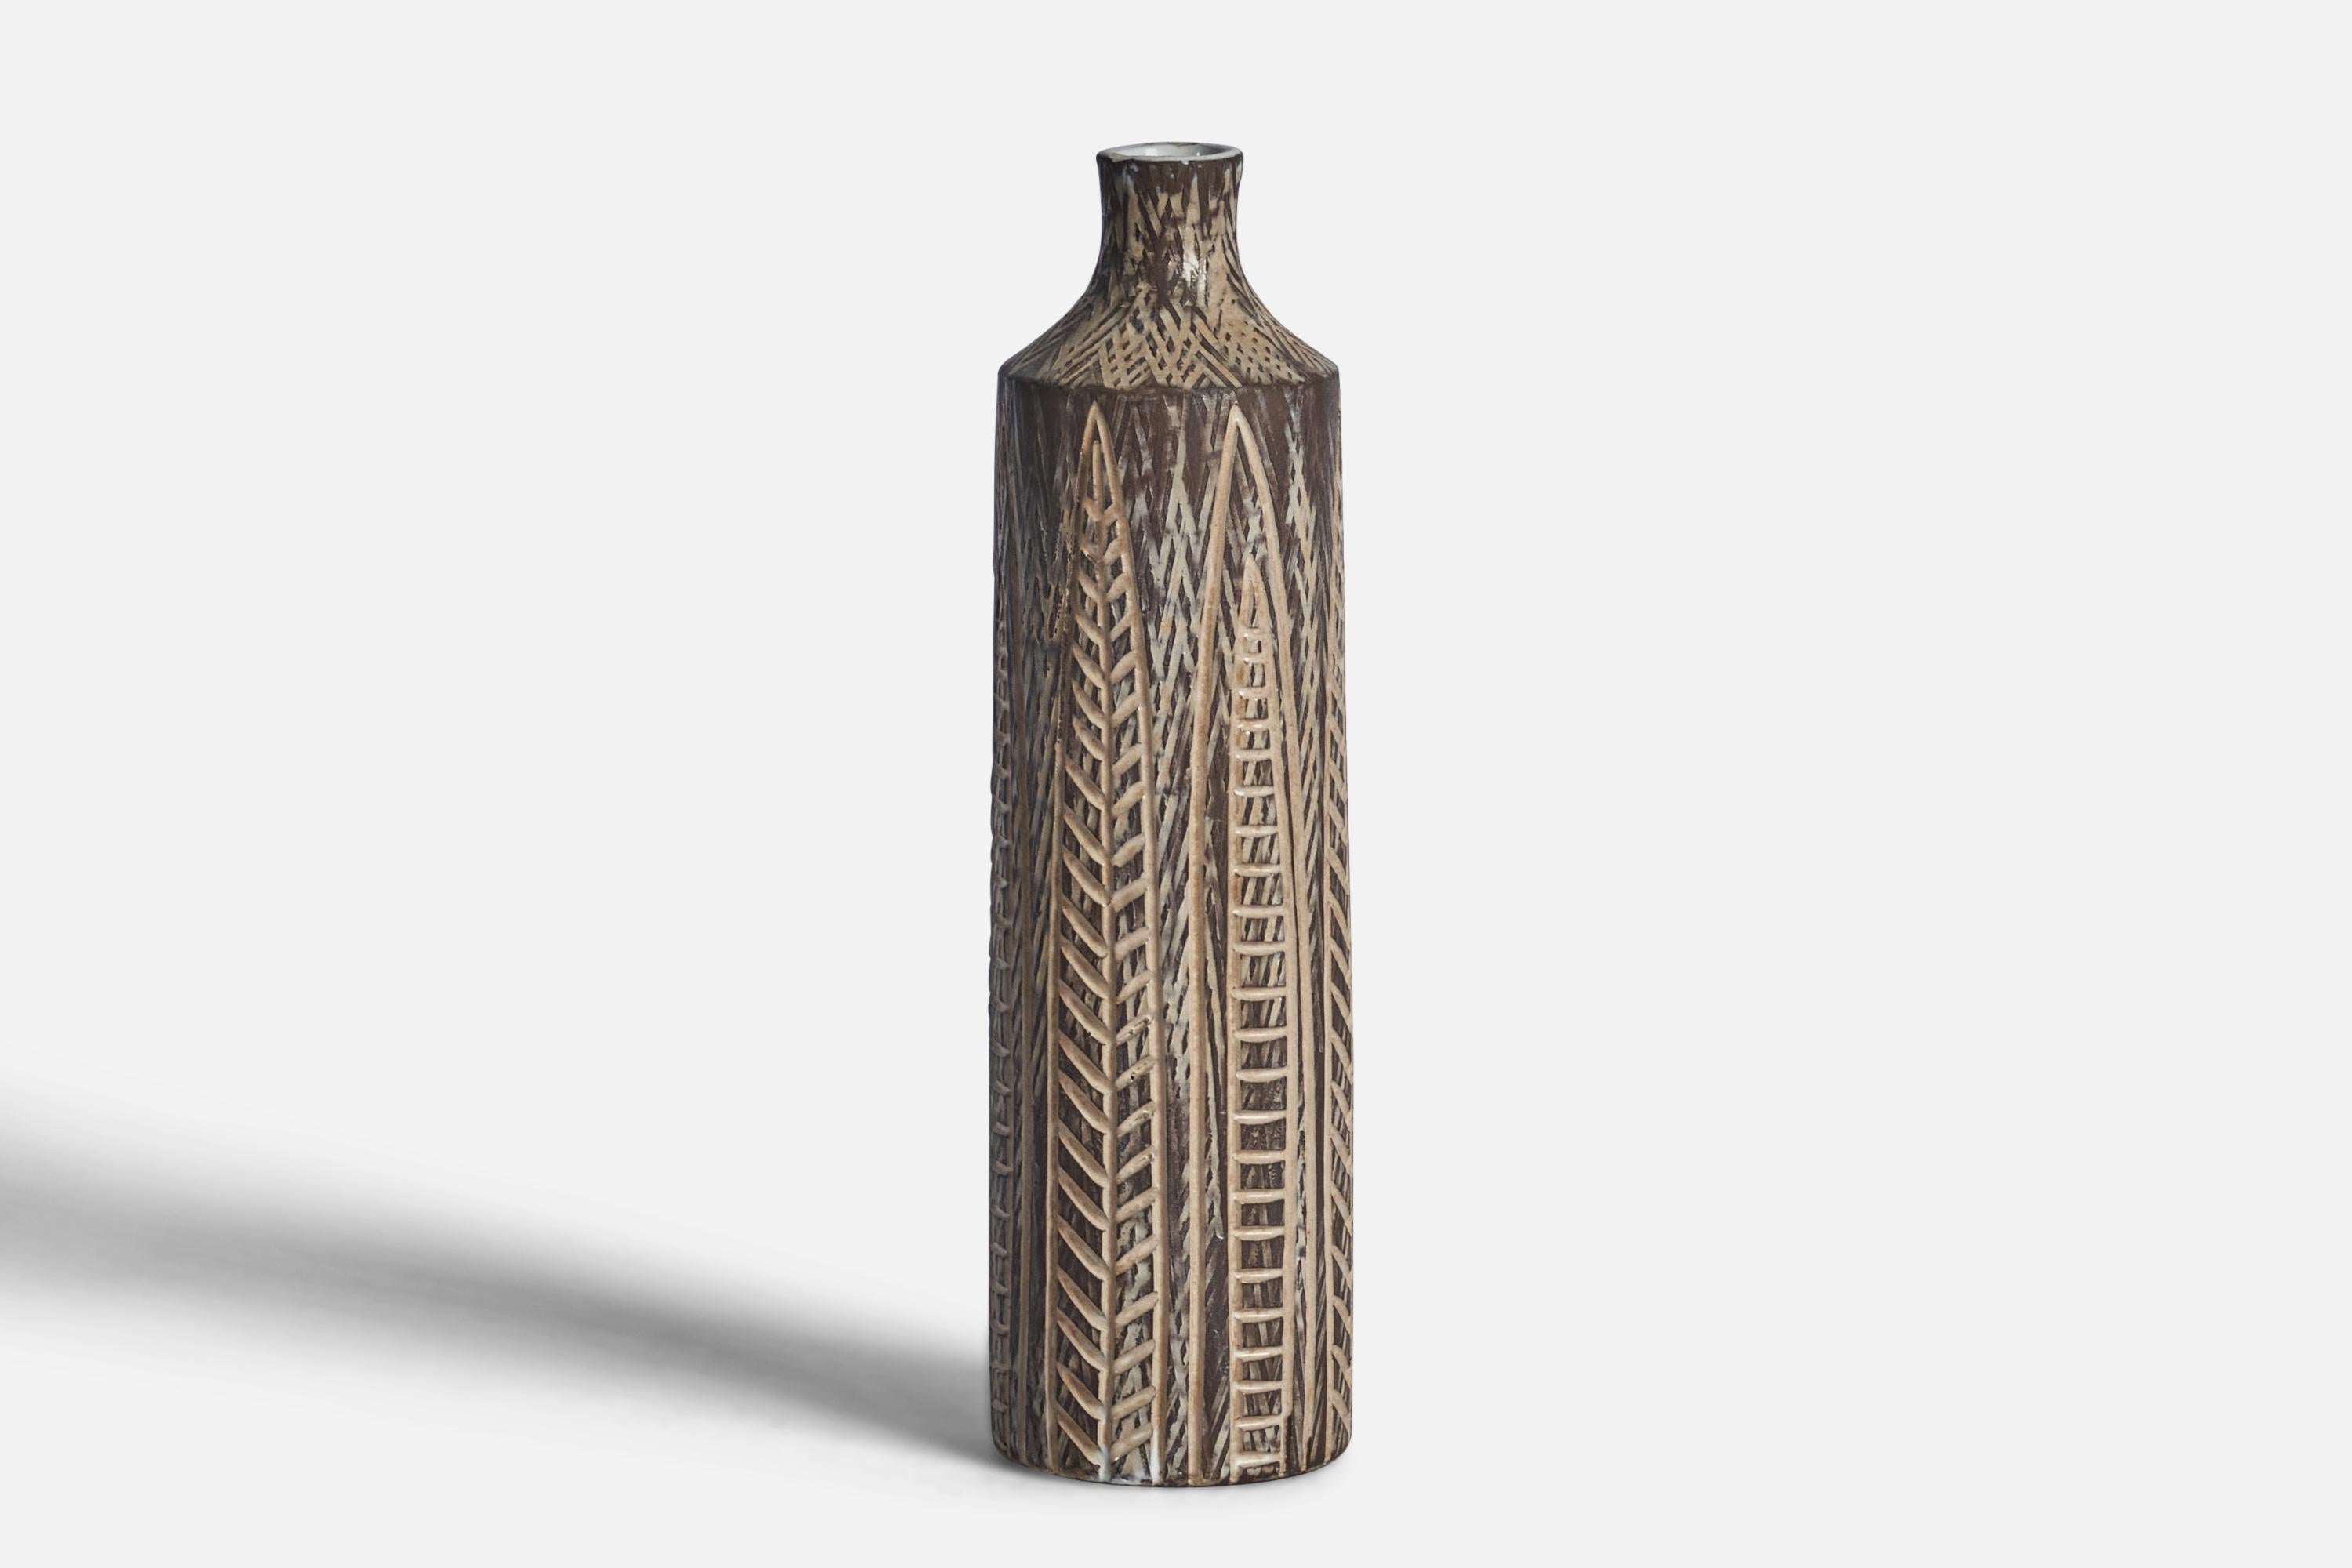 An incised grey-glazed earthenware vase designed by Mari Simmulson and produced by Upsala Ekeby, Sweden, 1950s.